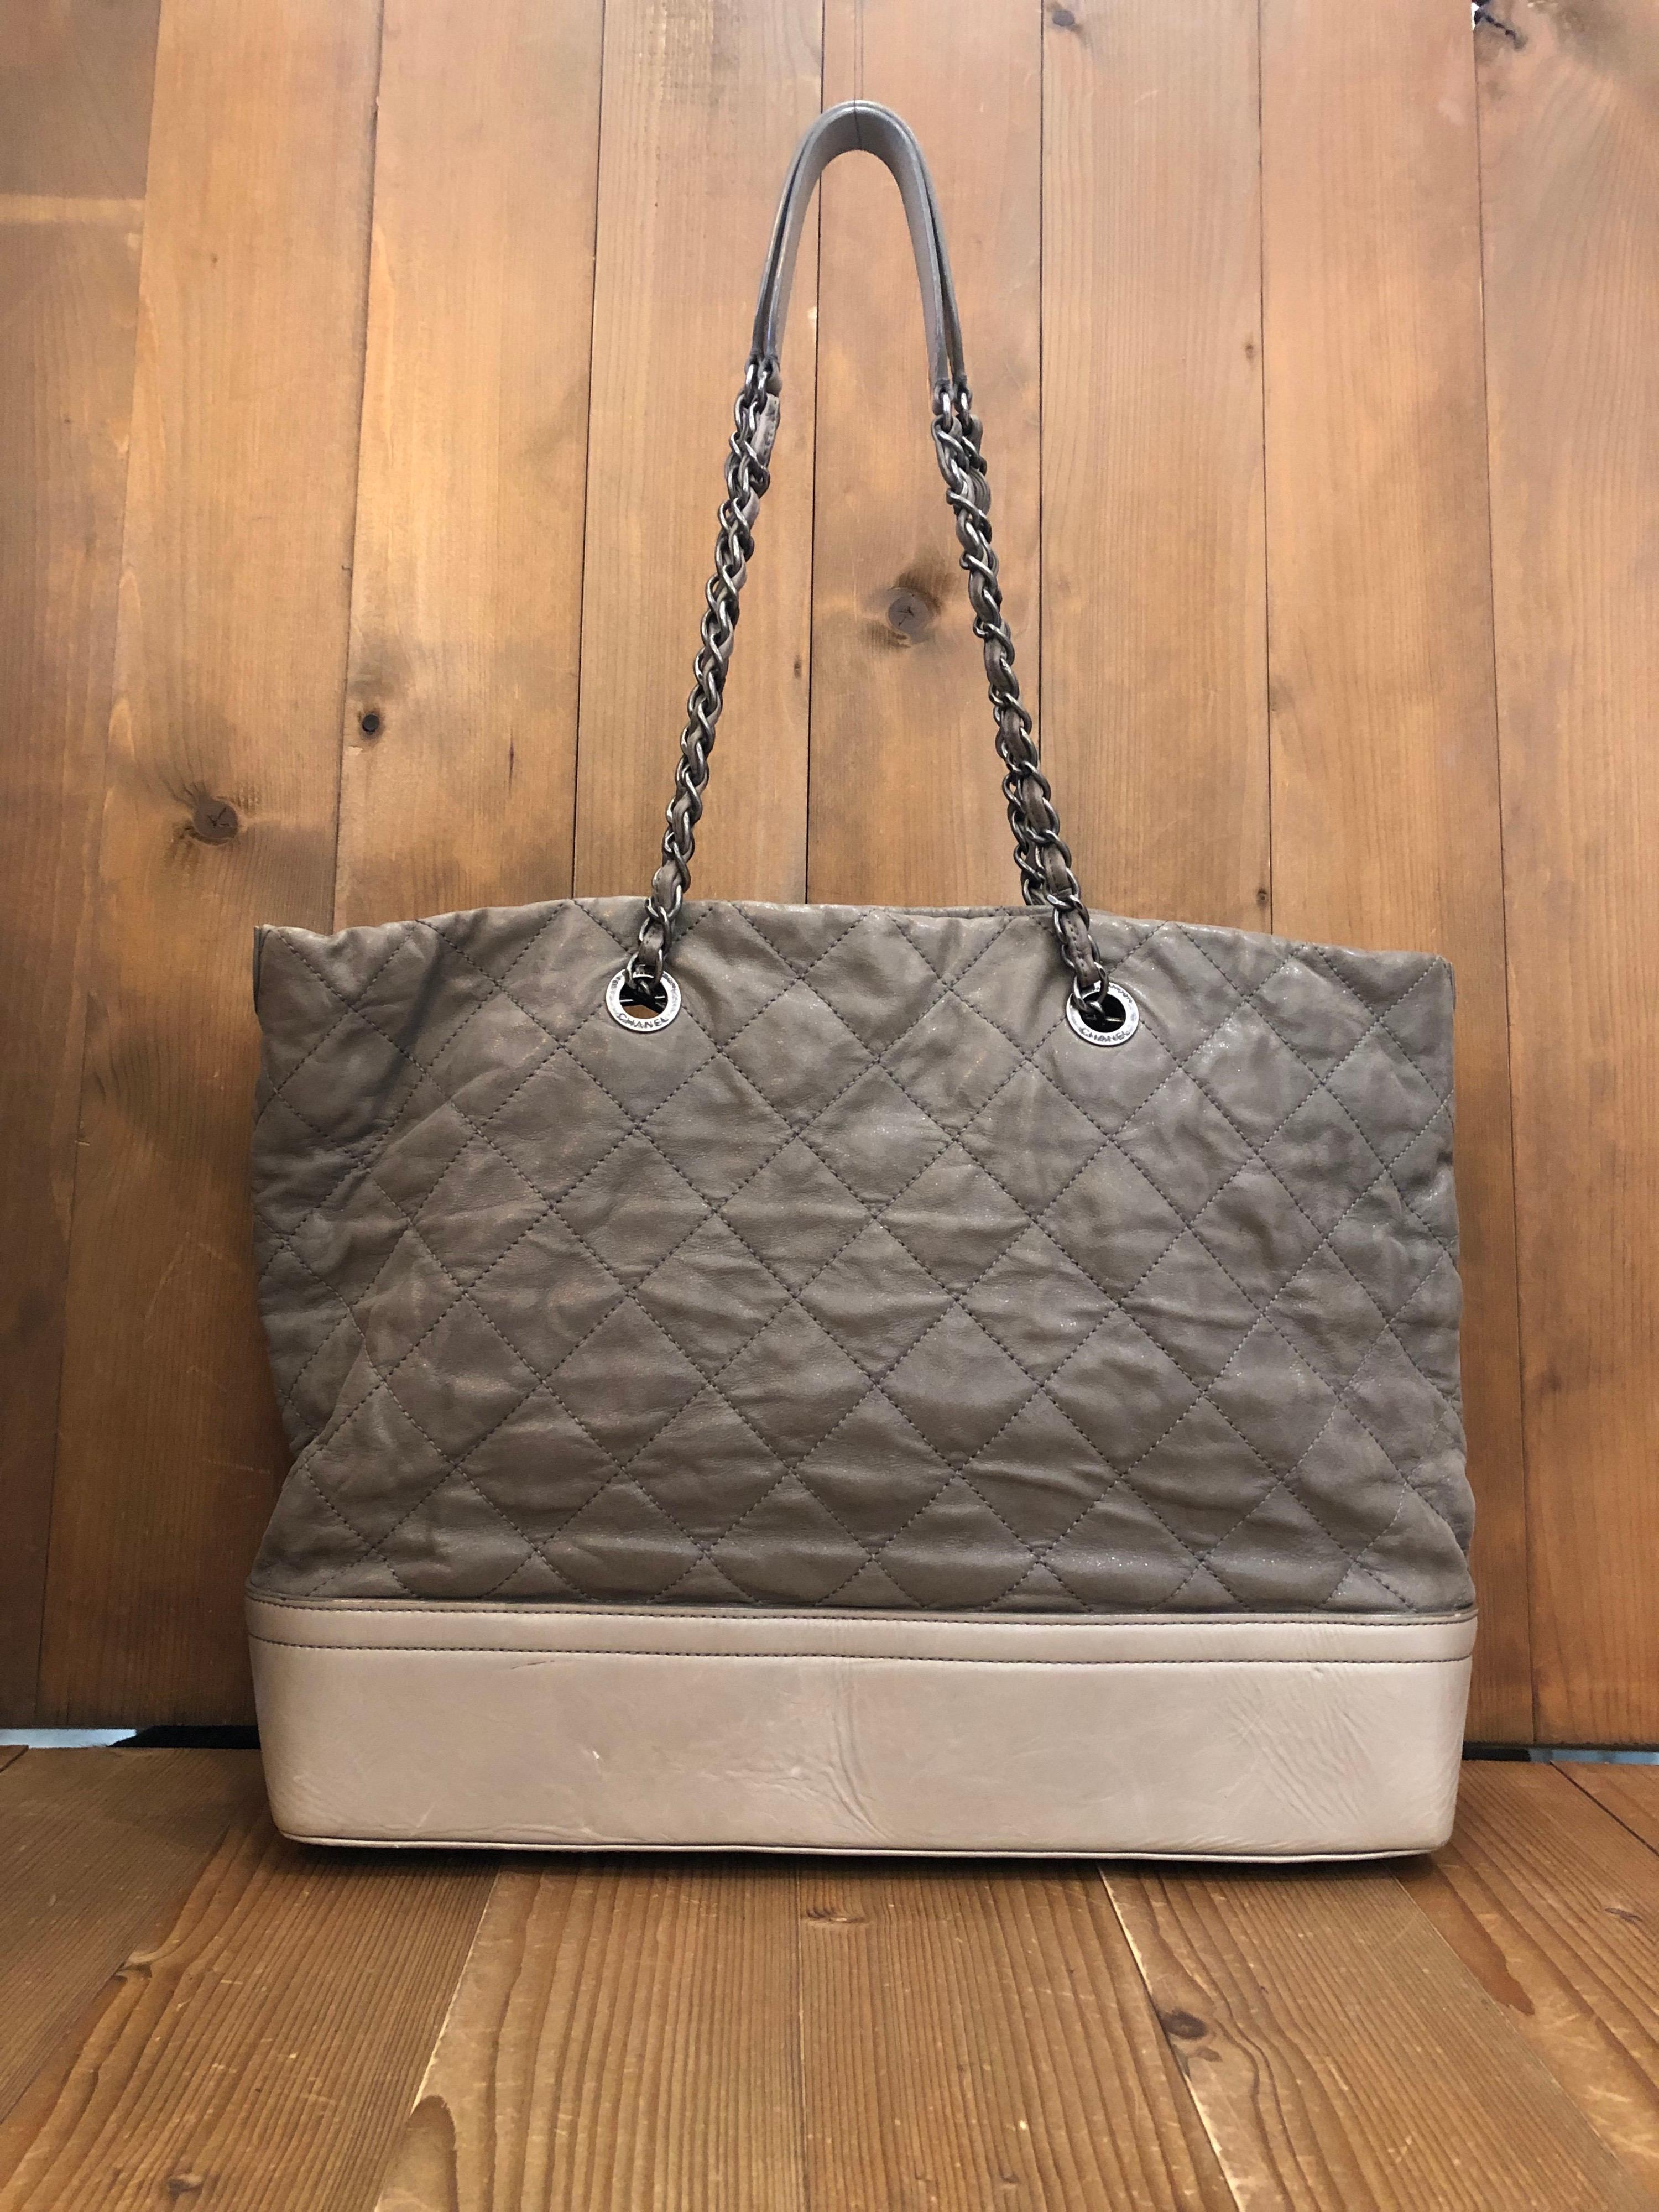 2011 Chanel XL chain tote in distressed khaki calfskin leather featuring one interior zip pocket and two interior open pockets. Detachable chain interlaced with the same leather. Made in Italy. Measures 18 (top) 14.5 (bottom) x 12 x 4.5 inches Drop